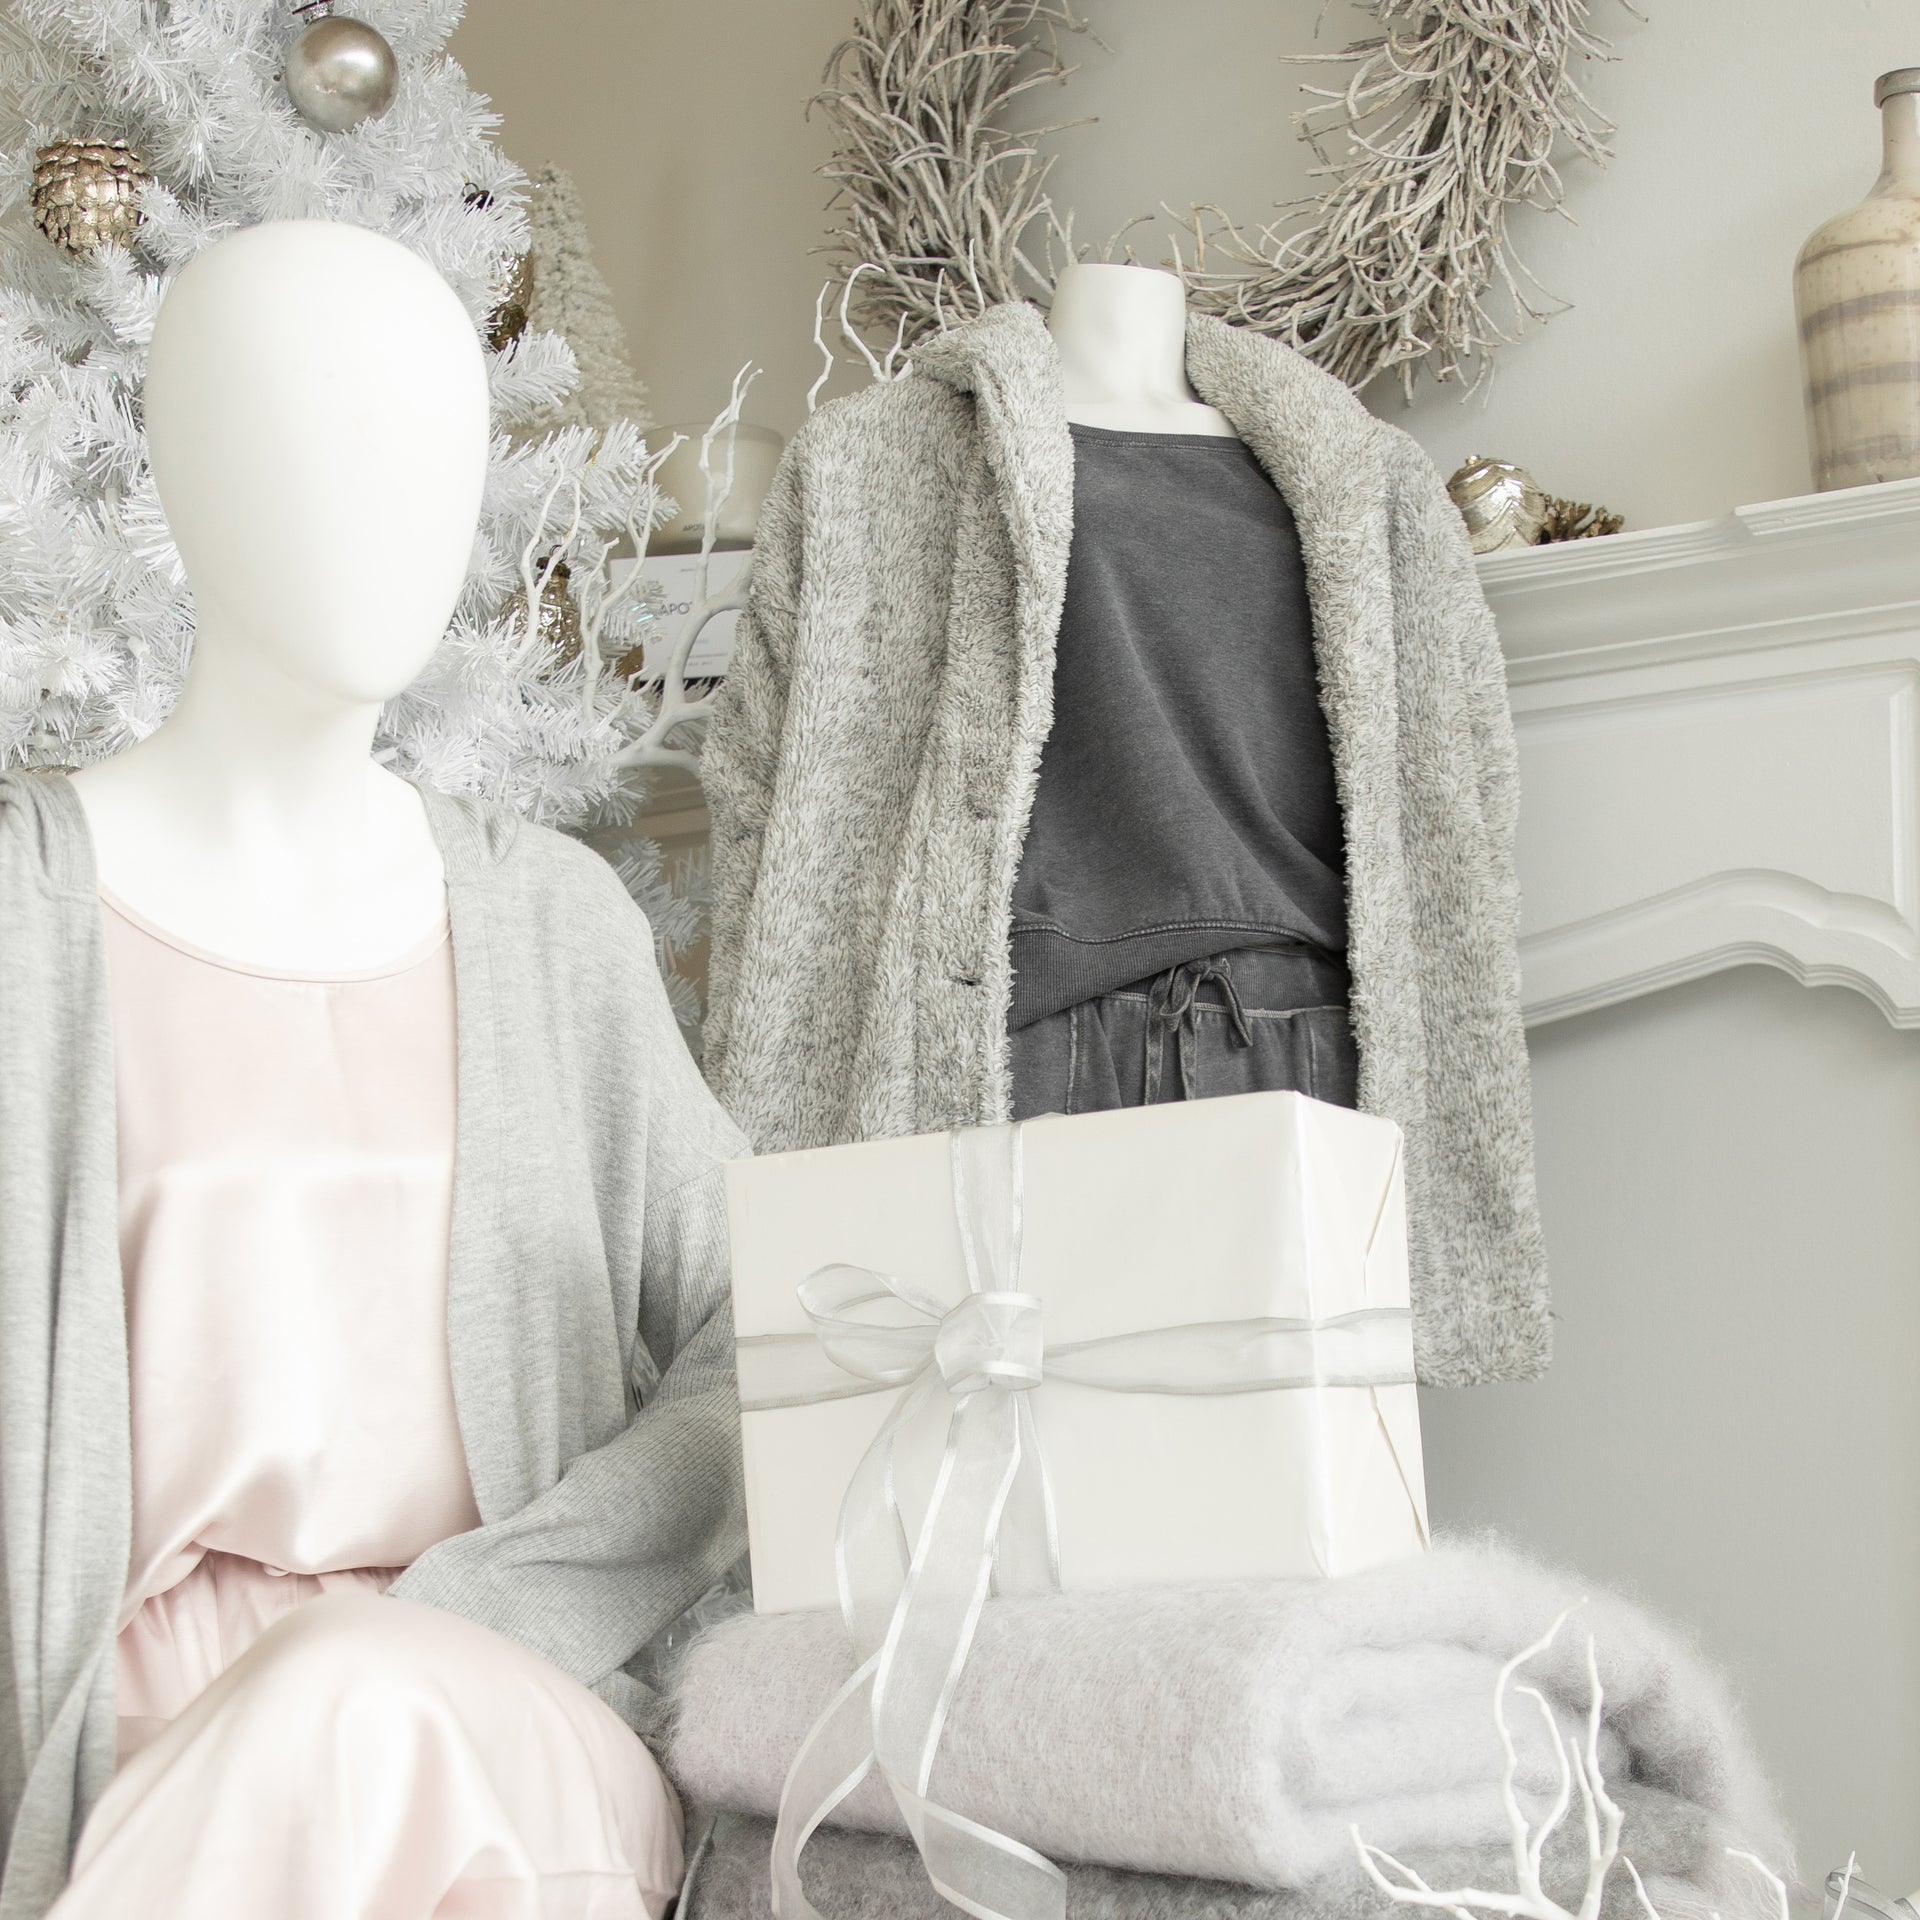 Holiday Store Tour + One-Of-A-Kind Gift Ideas!